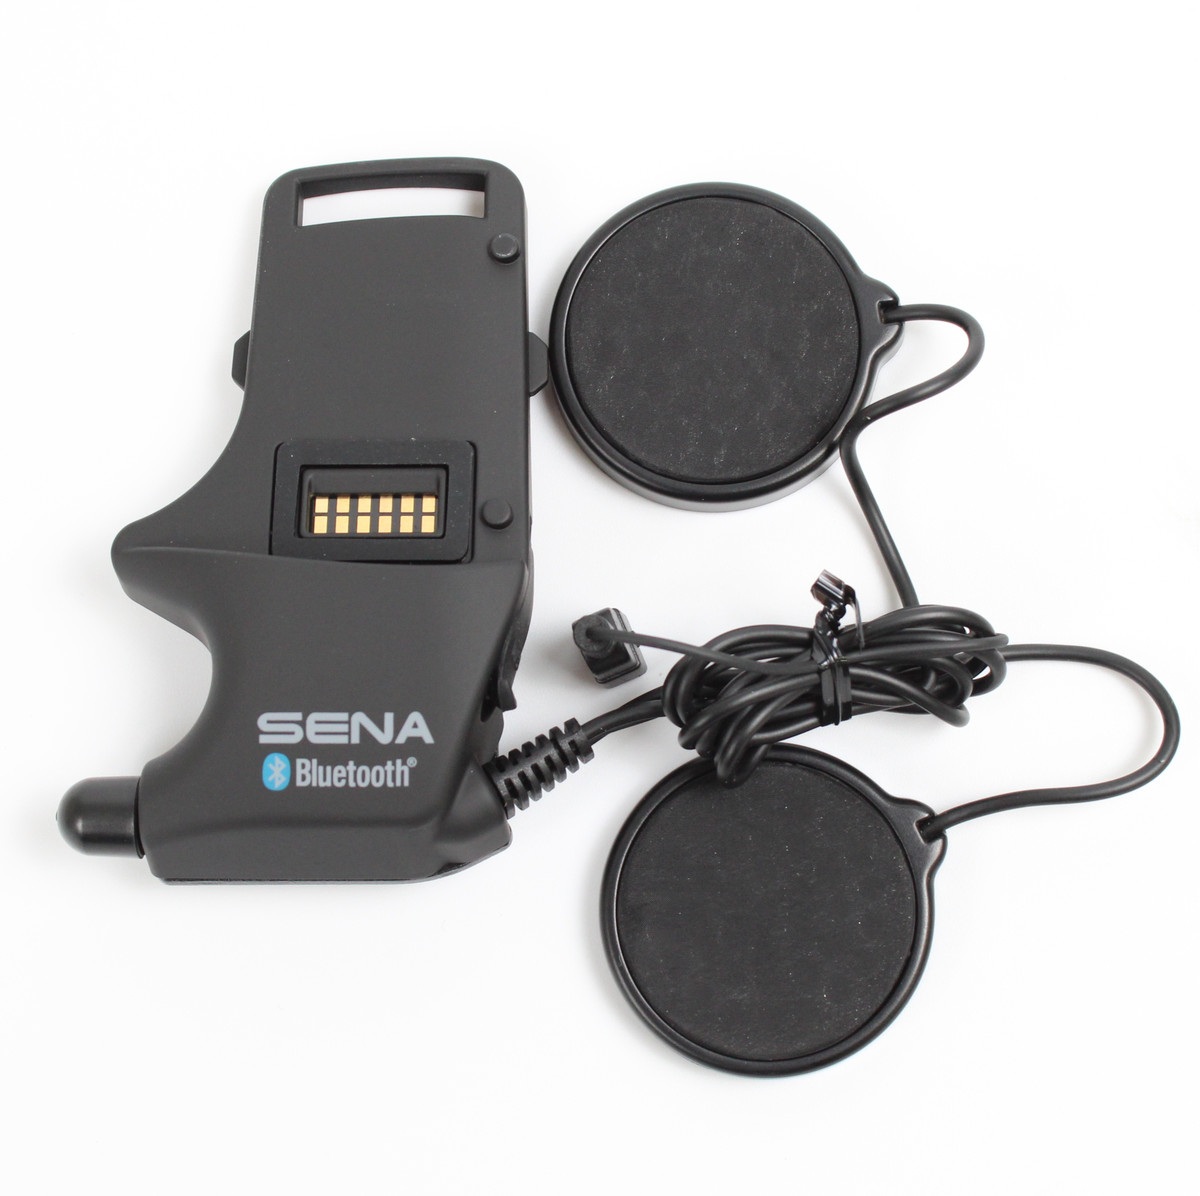 Sena Helmet Clamp Kit – Attachable Boom Microphone & Wired Microphone (p/n- SMH-A0302)